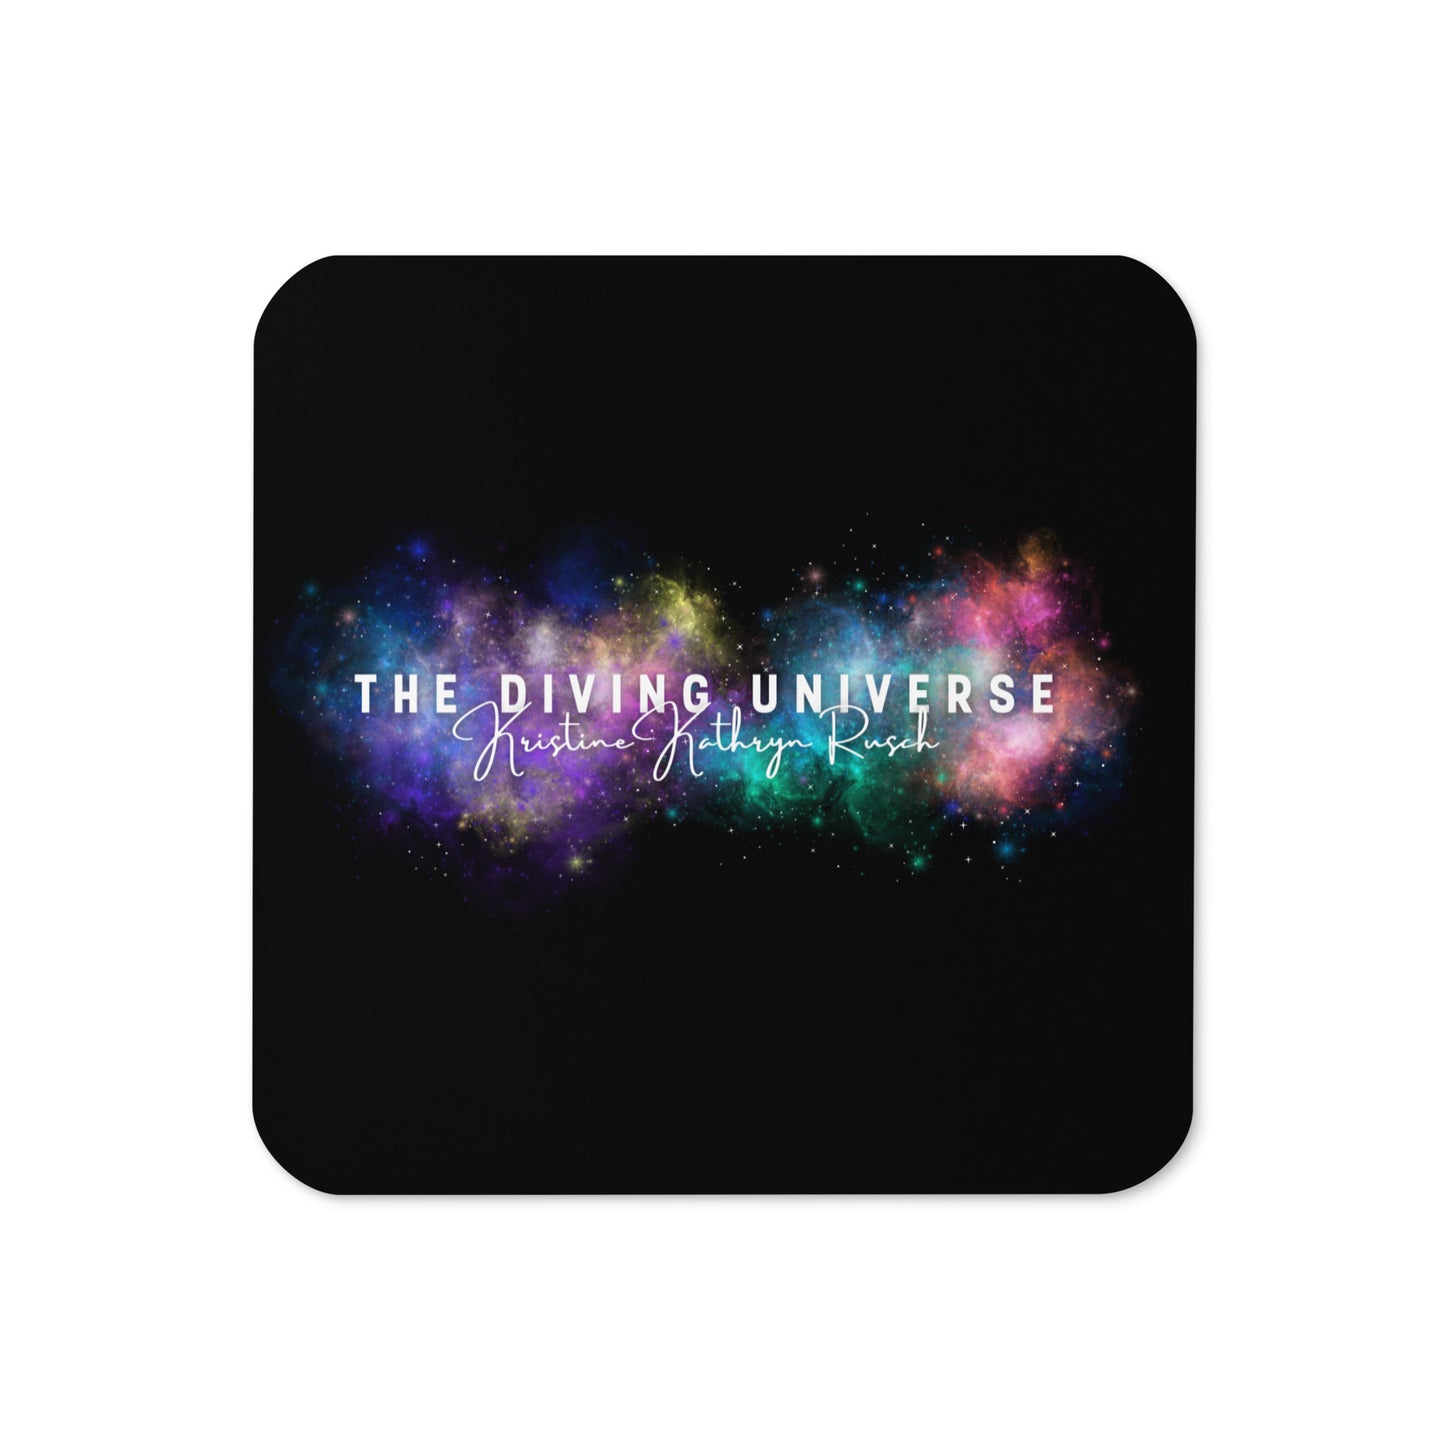 DIVING UNIVERSE NEBULA Logo Coaster (Cork-Backed) - The Diving Universe (SPACE OPERA Book Series) by Kristine Kathryn Rusch